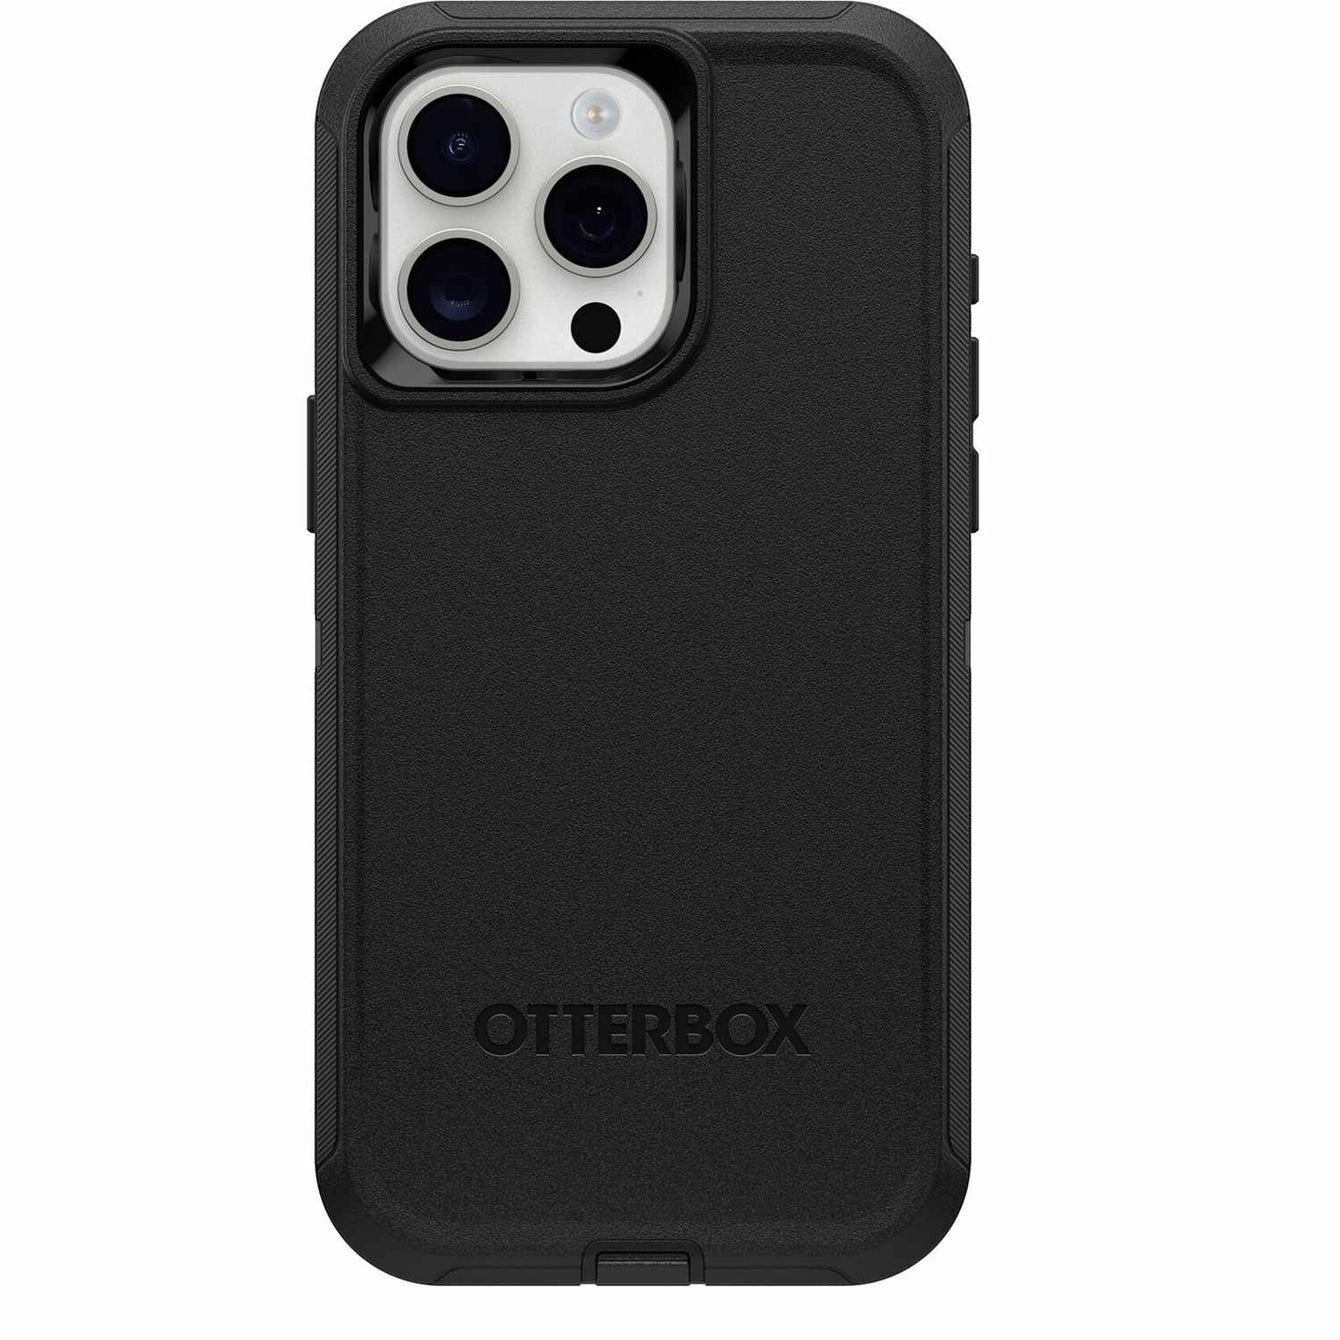 OtterBox Defender Case for iPhone 11 Pro Max Black